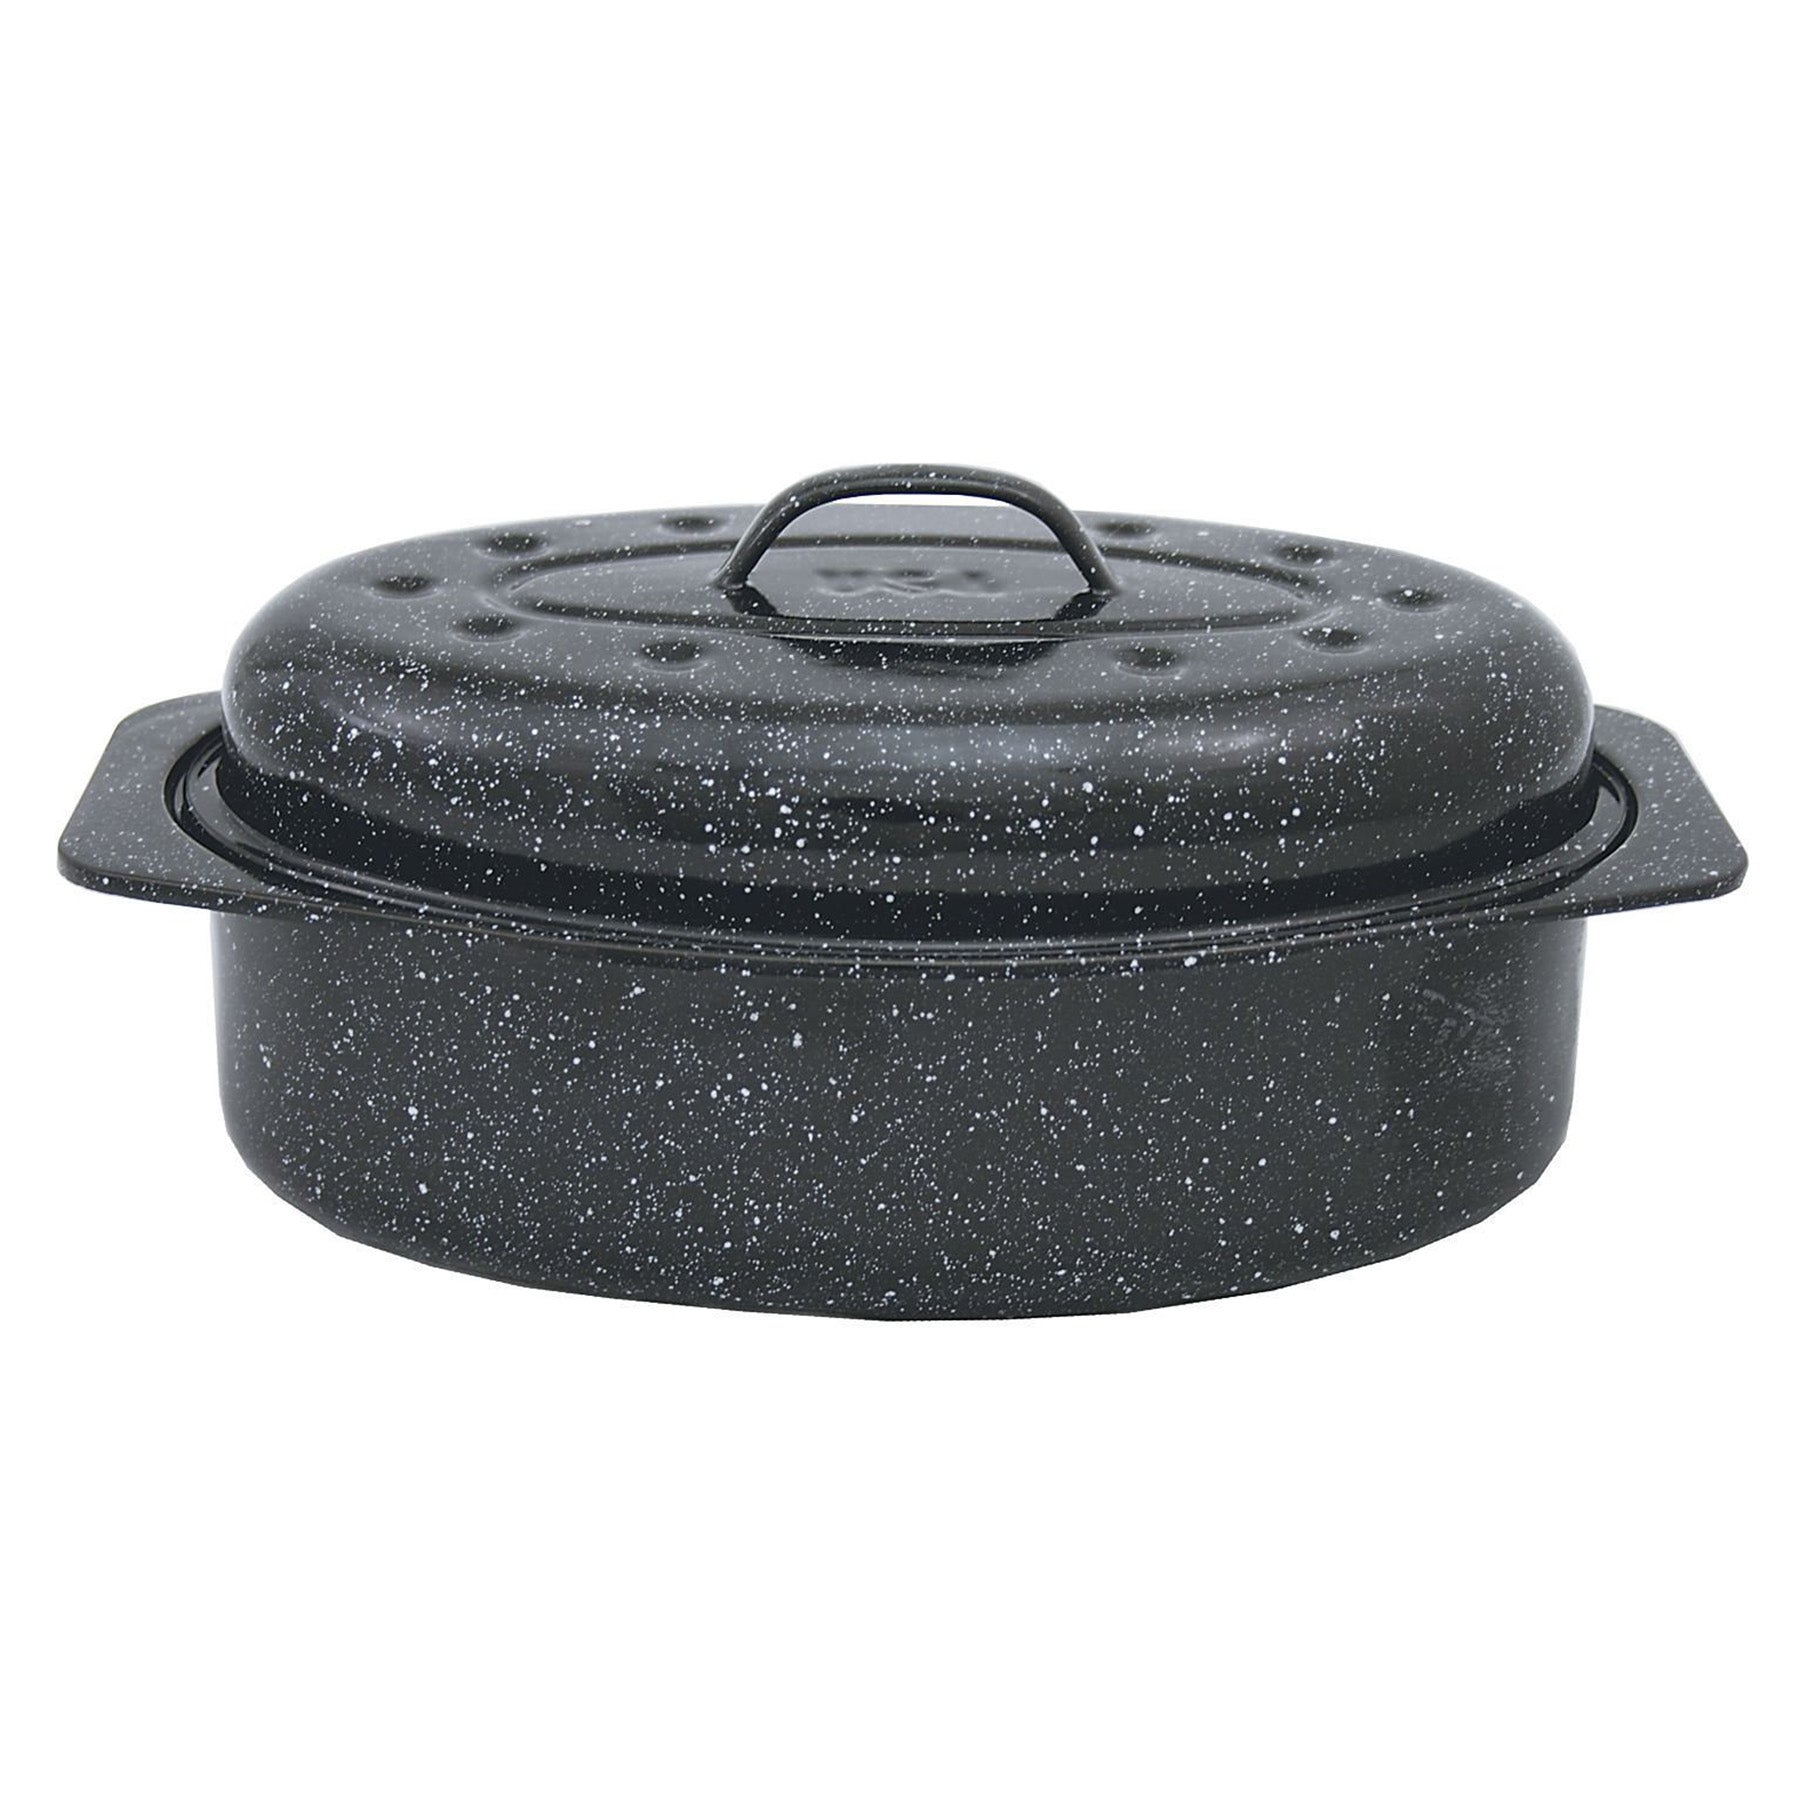 Oval Roaster With Lid - Black Color